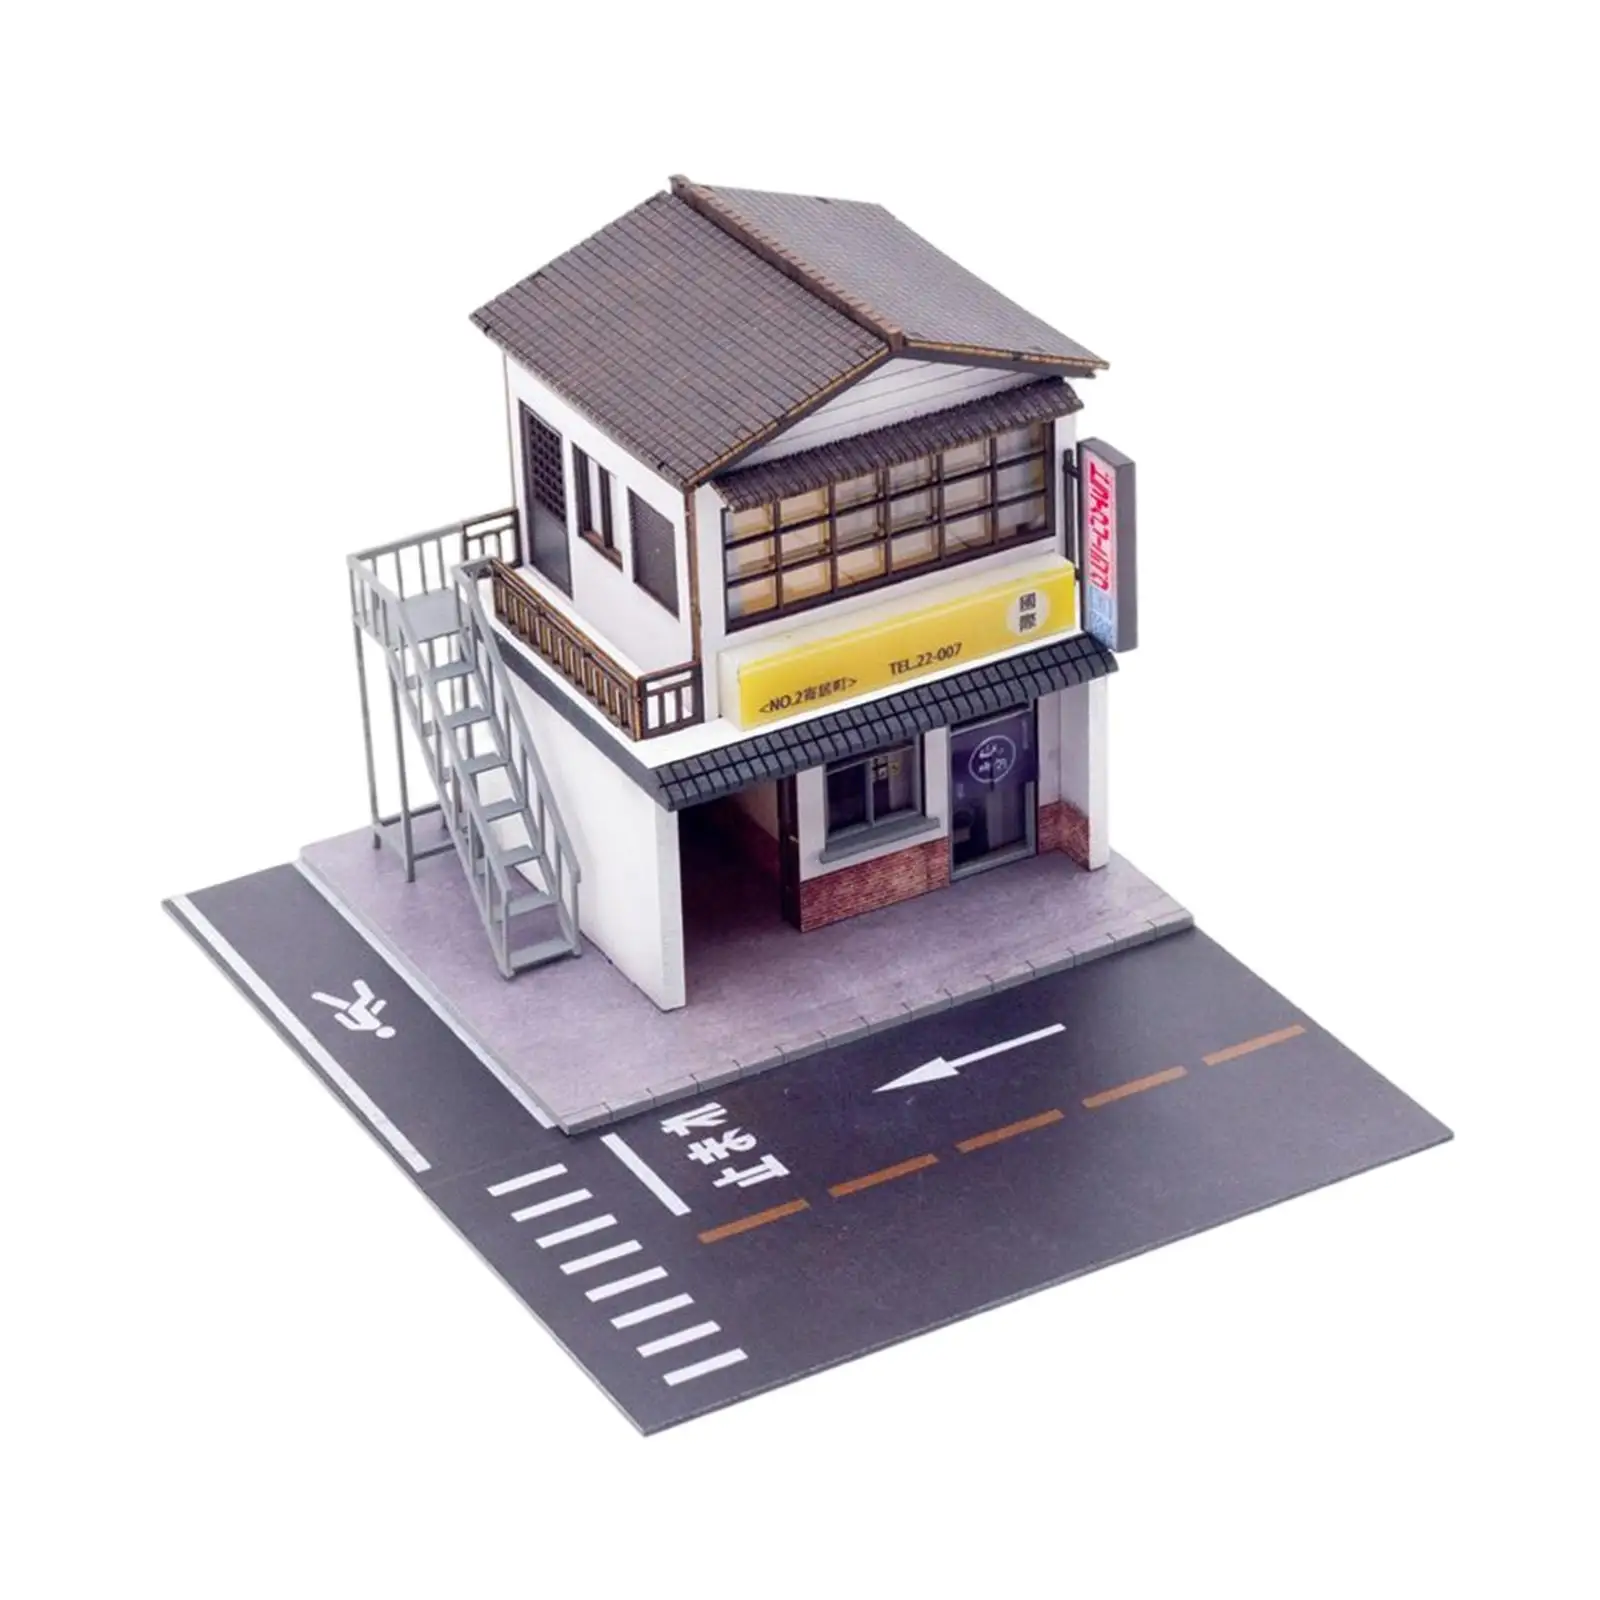 Miniature 1:64 Scale Dry Cleaners Diorama Scenery Collection Gifts Scene Toy Desktop Home Sand Table Layout Office Decoration